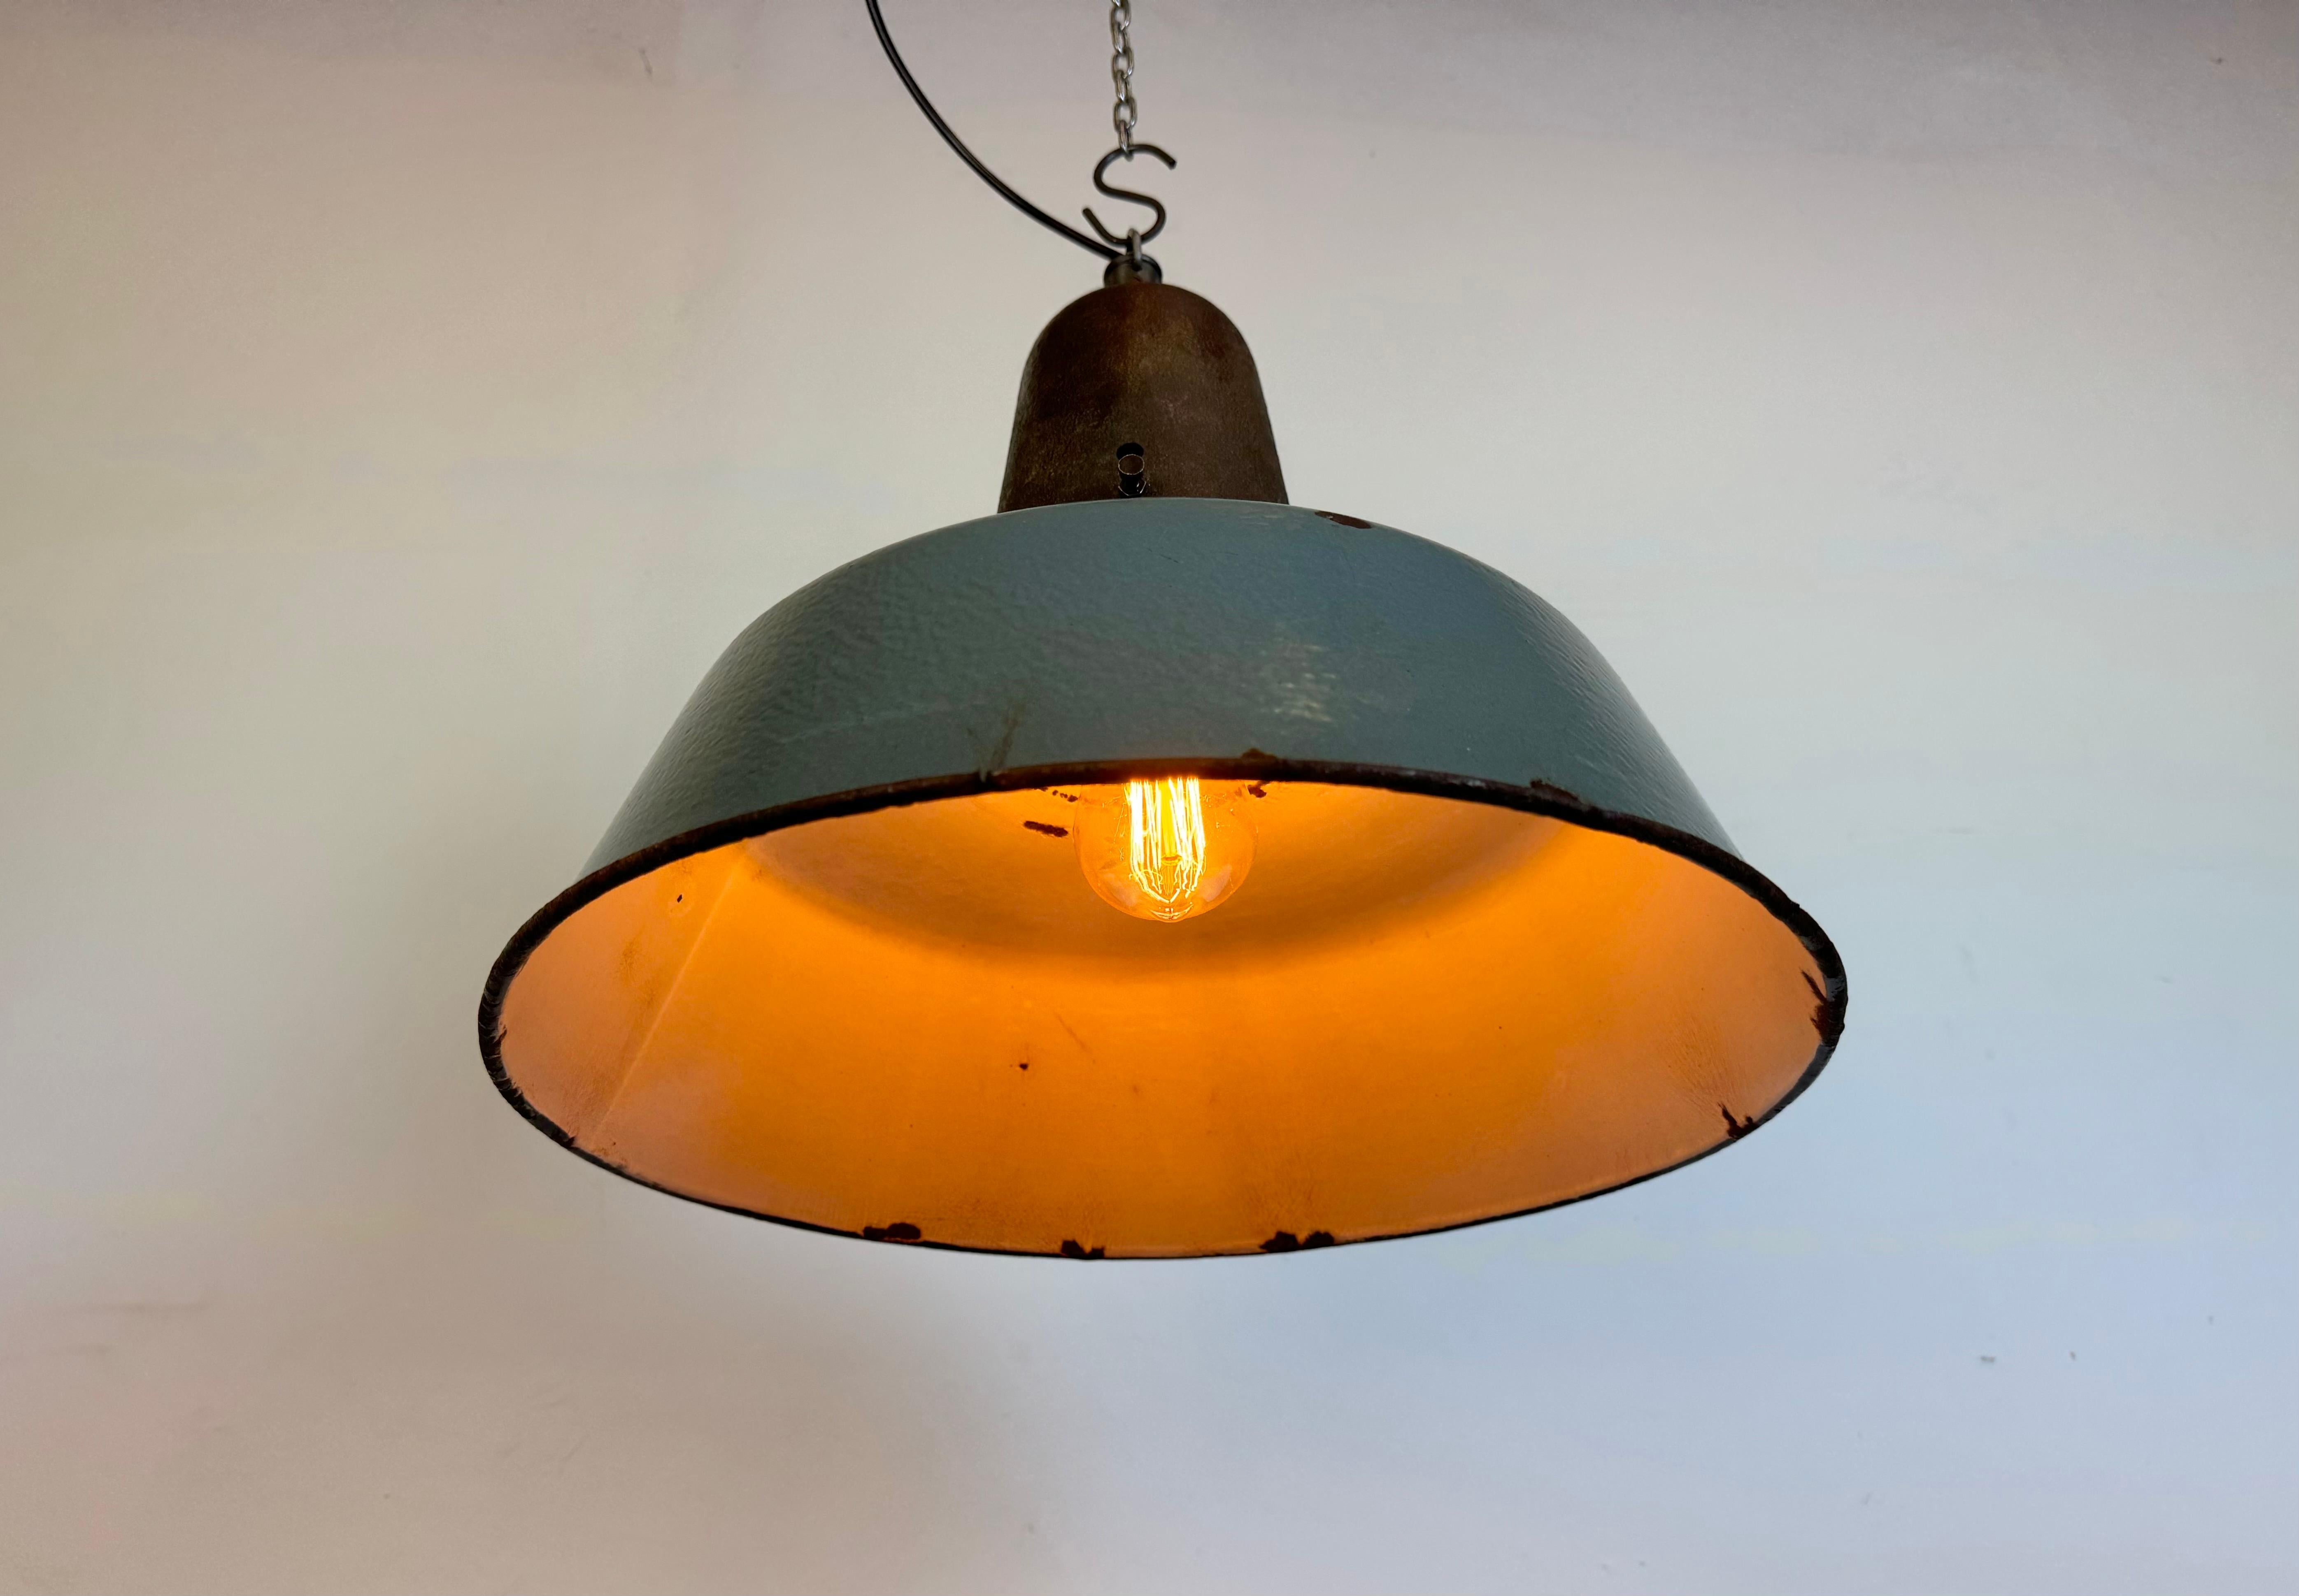 Large Industrial Grey Enamel Factory Lamp with Cast Iron Top, 1960s For Sale 7